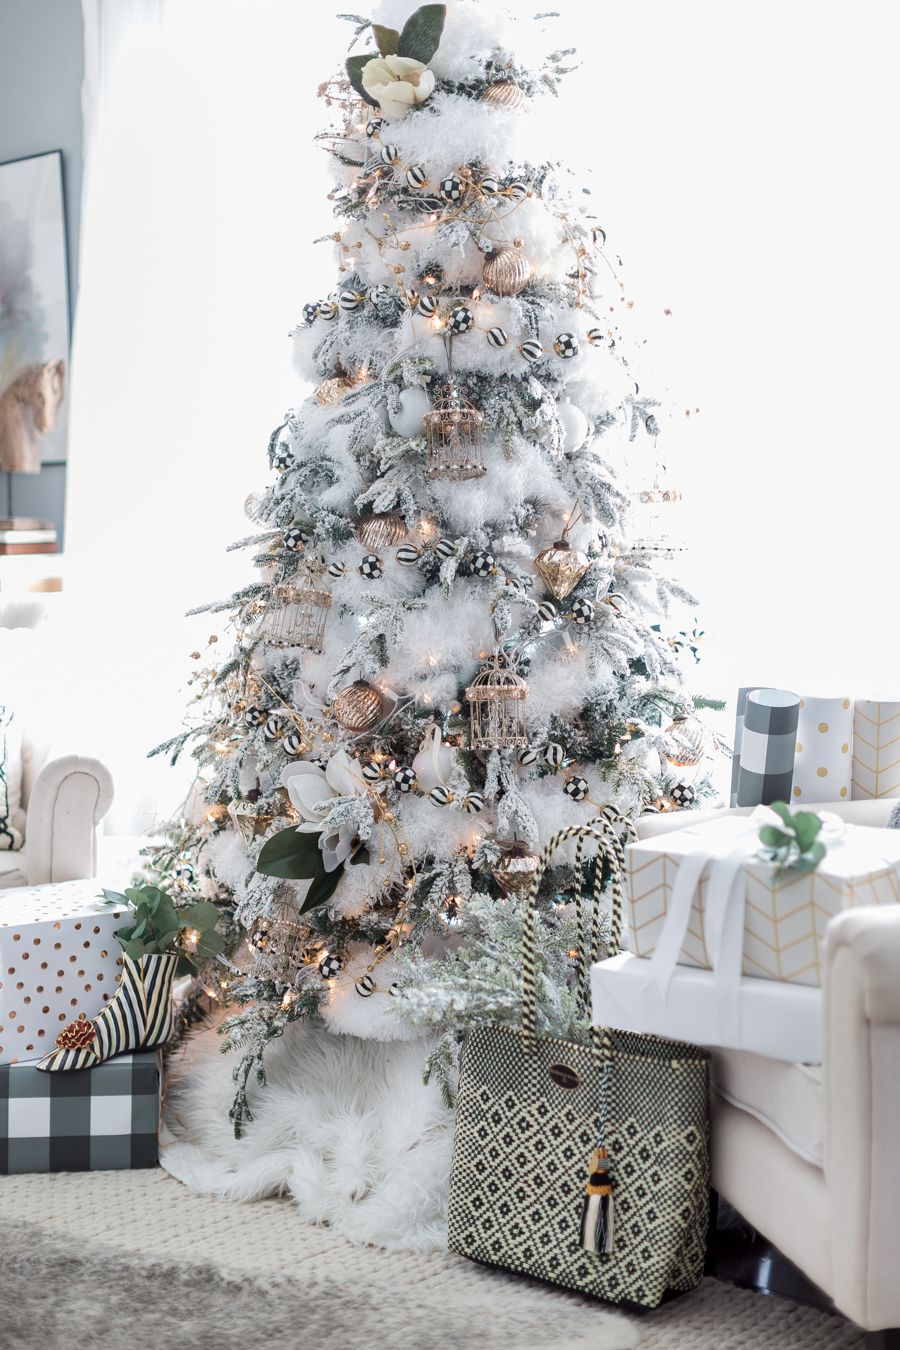 65 Unique Christmas Tree Decorating Ideas And Pictures 2020